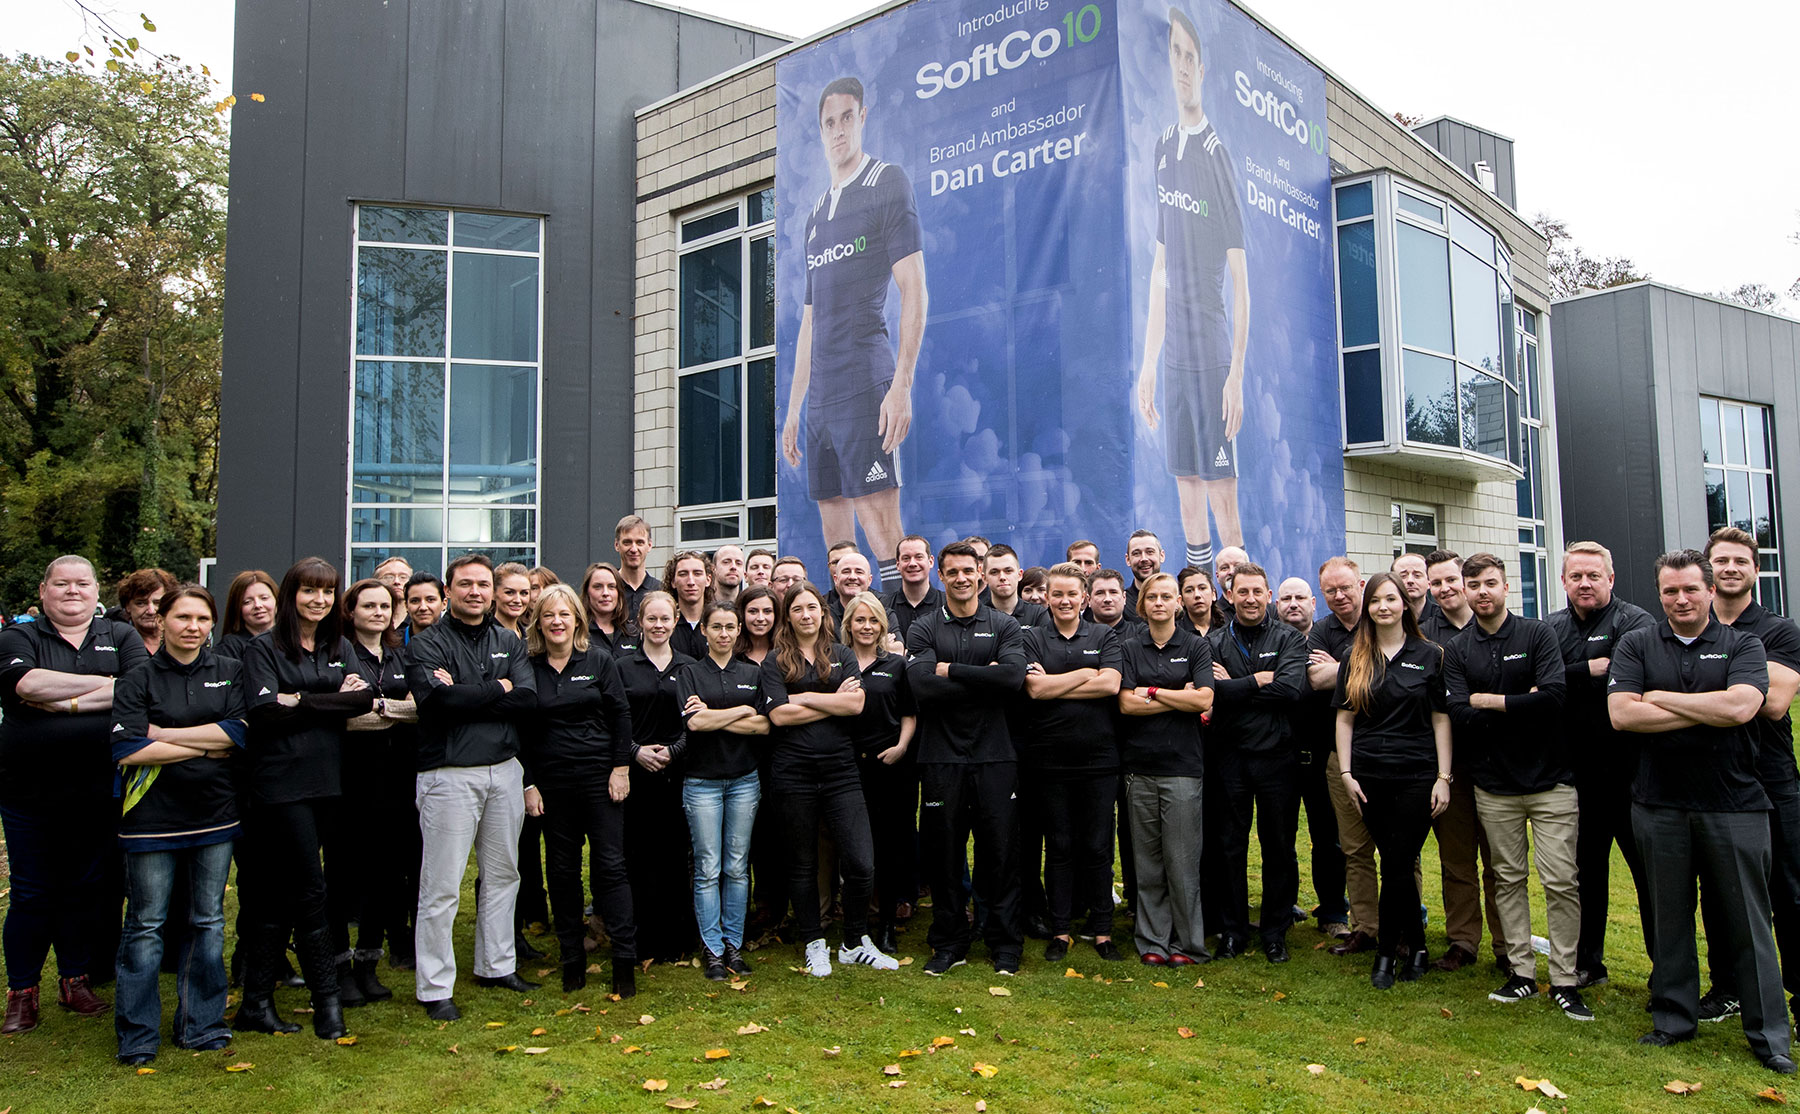 SoftCo Team outside SoftCo building